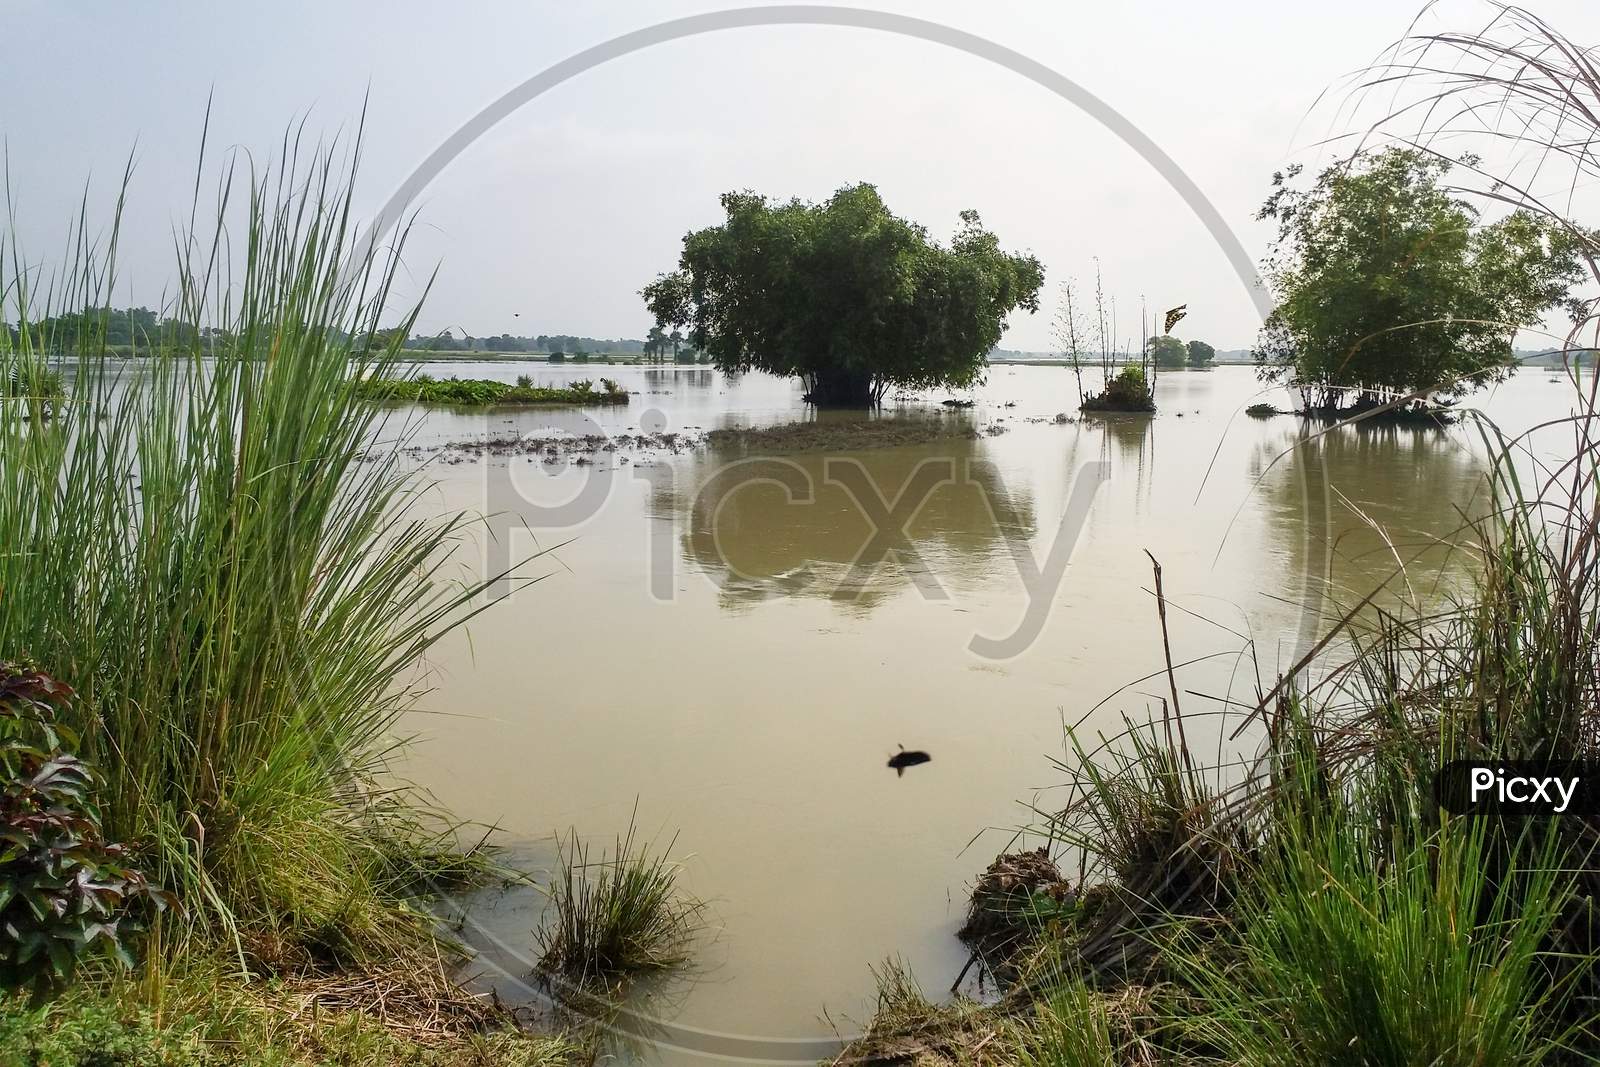 The landscape of flooded vast wetlands after heavy rain in West Bengal of India